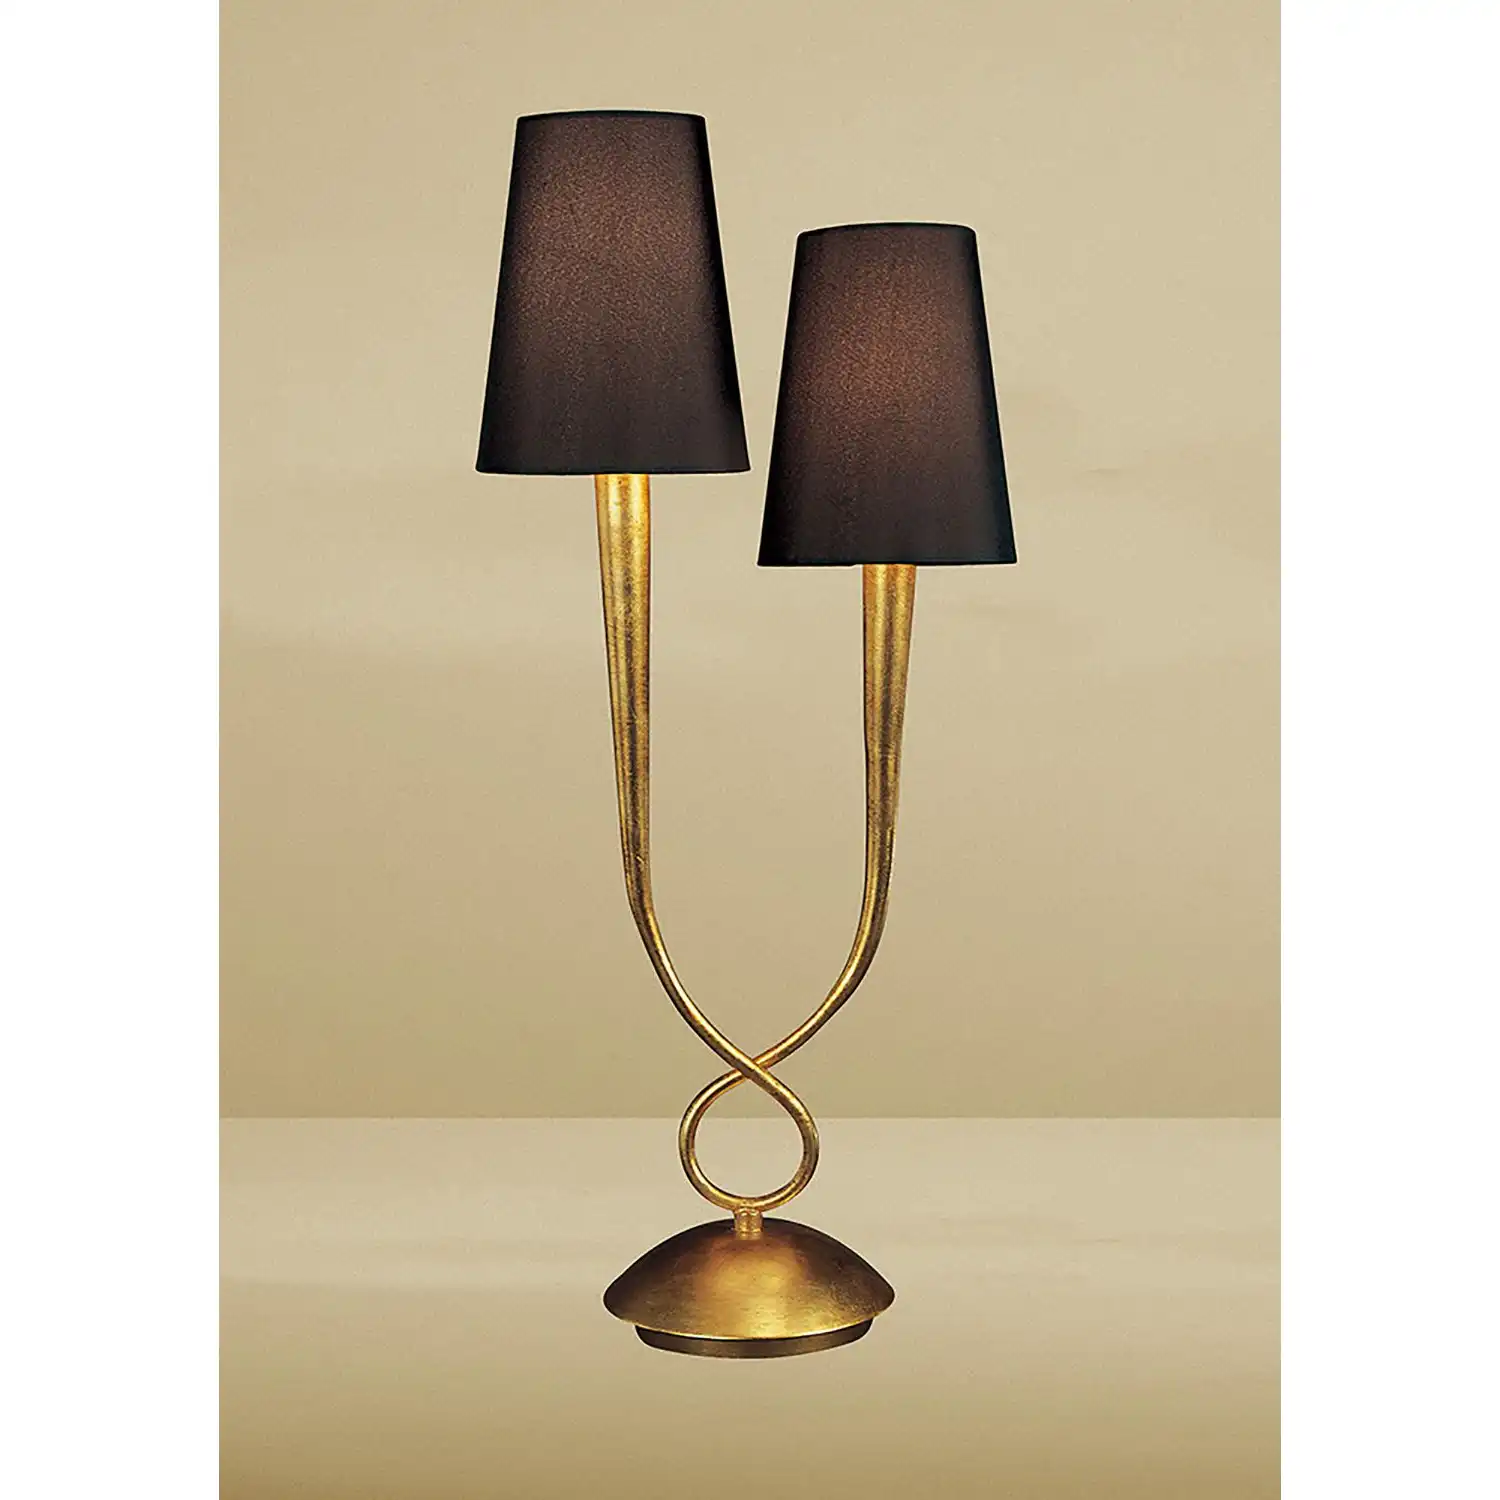 Paola Table Lamp 2 Light E14, Gold Painted With Black Shades